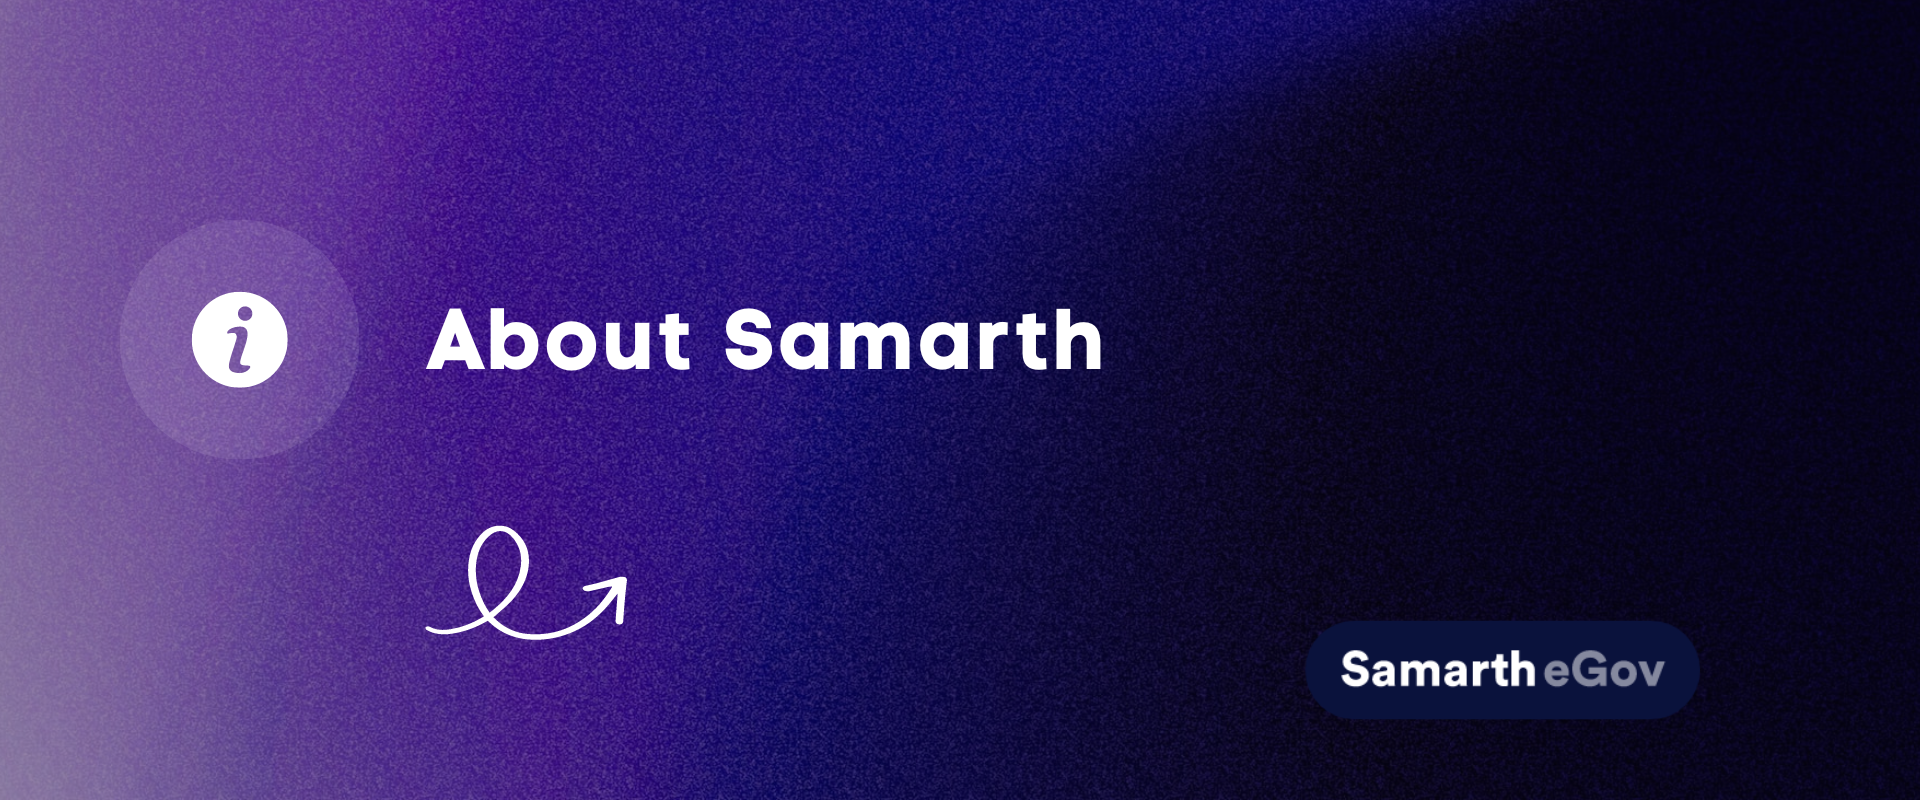 SAMARTH” (meaning 'capable'), Online Professional Development of